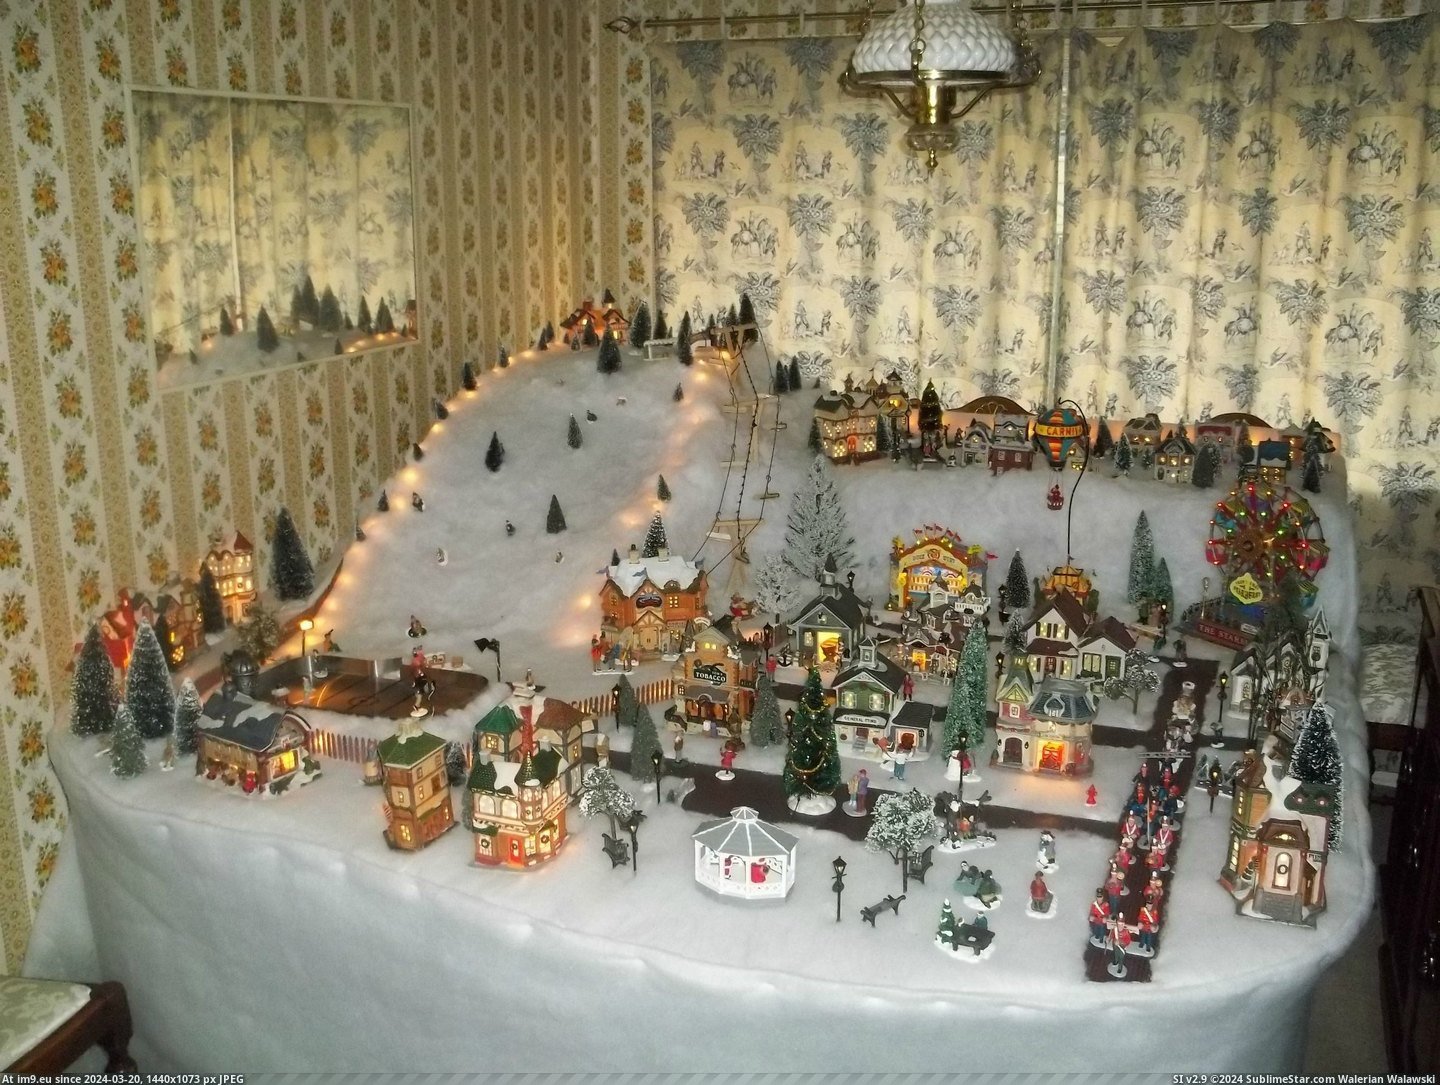 #Wife #Christmas #She #Village #Hobbies #How #Get #Wanted [Pics] The wife said she wanted a Christmas village, she should know how serious I get with hobbies. Pic. (Bild von album My r/PICS favs))